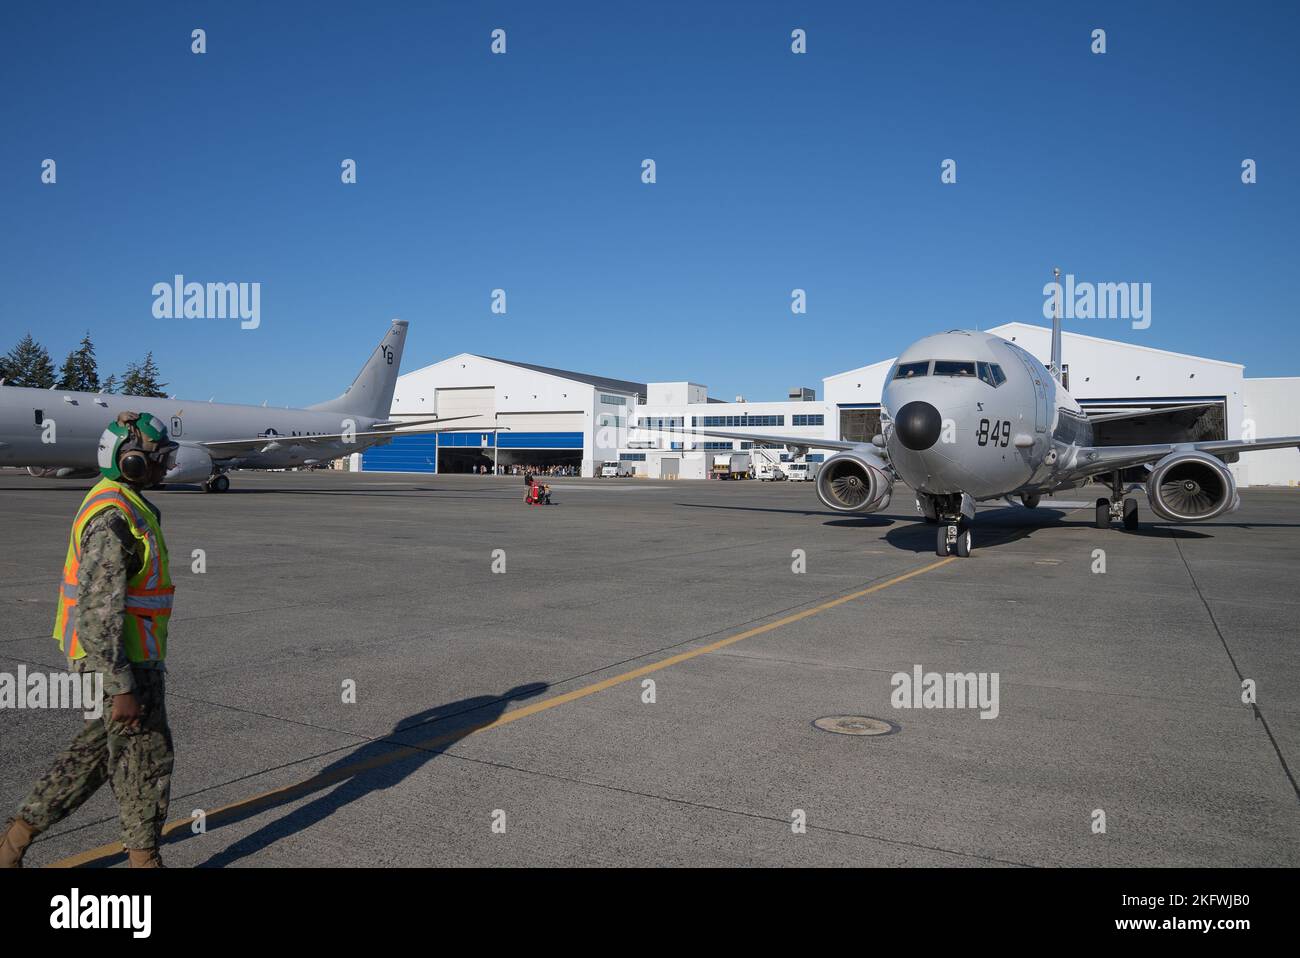 221011-N-AN659-1015 Naval Air Station Whidbey Island, Wash. (Oct. 02, 2022) – Aviation Structural Mechanic 3rd Class Stephon Bonaldi attached to Patrol Squadron (VP) 46, the ‘Grey Knights’, guides a P8-A Poseidon to a parked position at Naval Air Station Whidbey Island (NASWI), Oct. 11, 2022. VP-46 returned to their homeport at NASWI after a six-month deployment to support operations for Commander, Task Force (CTF) 57 and 67. Stock Photo